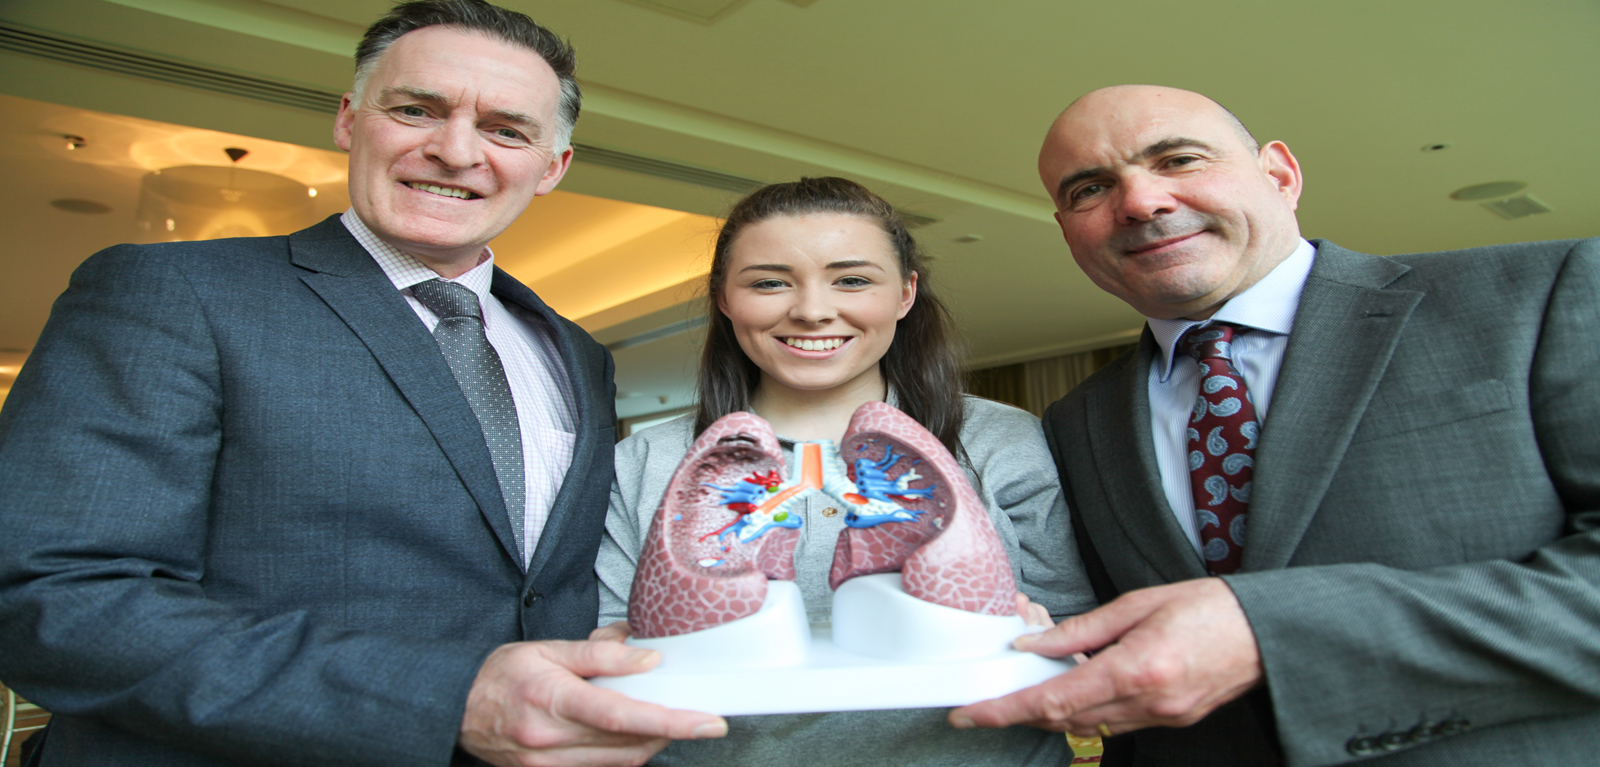 Dr Lorcan McGarvey of Queen University Belfast, PhD Student Nicola Roe Queens University Belfast and Dr Keith Thornbury of  the Smooth Muscle Research Centre at Dundalk Institute of Technology at the  BREATH Project launch in the Ballymascanlon Hotel, Dundalk, Co. Louth